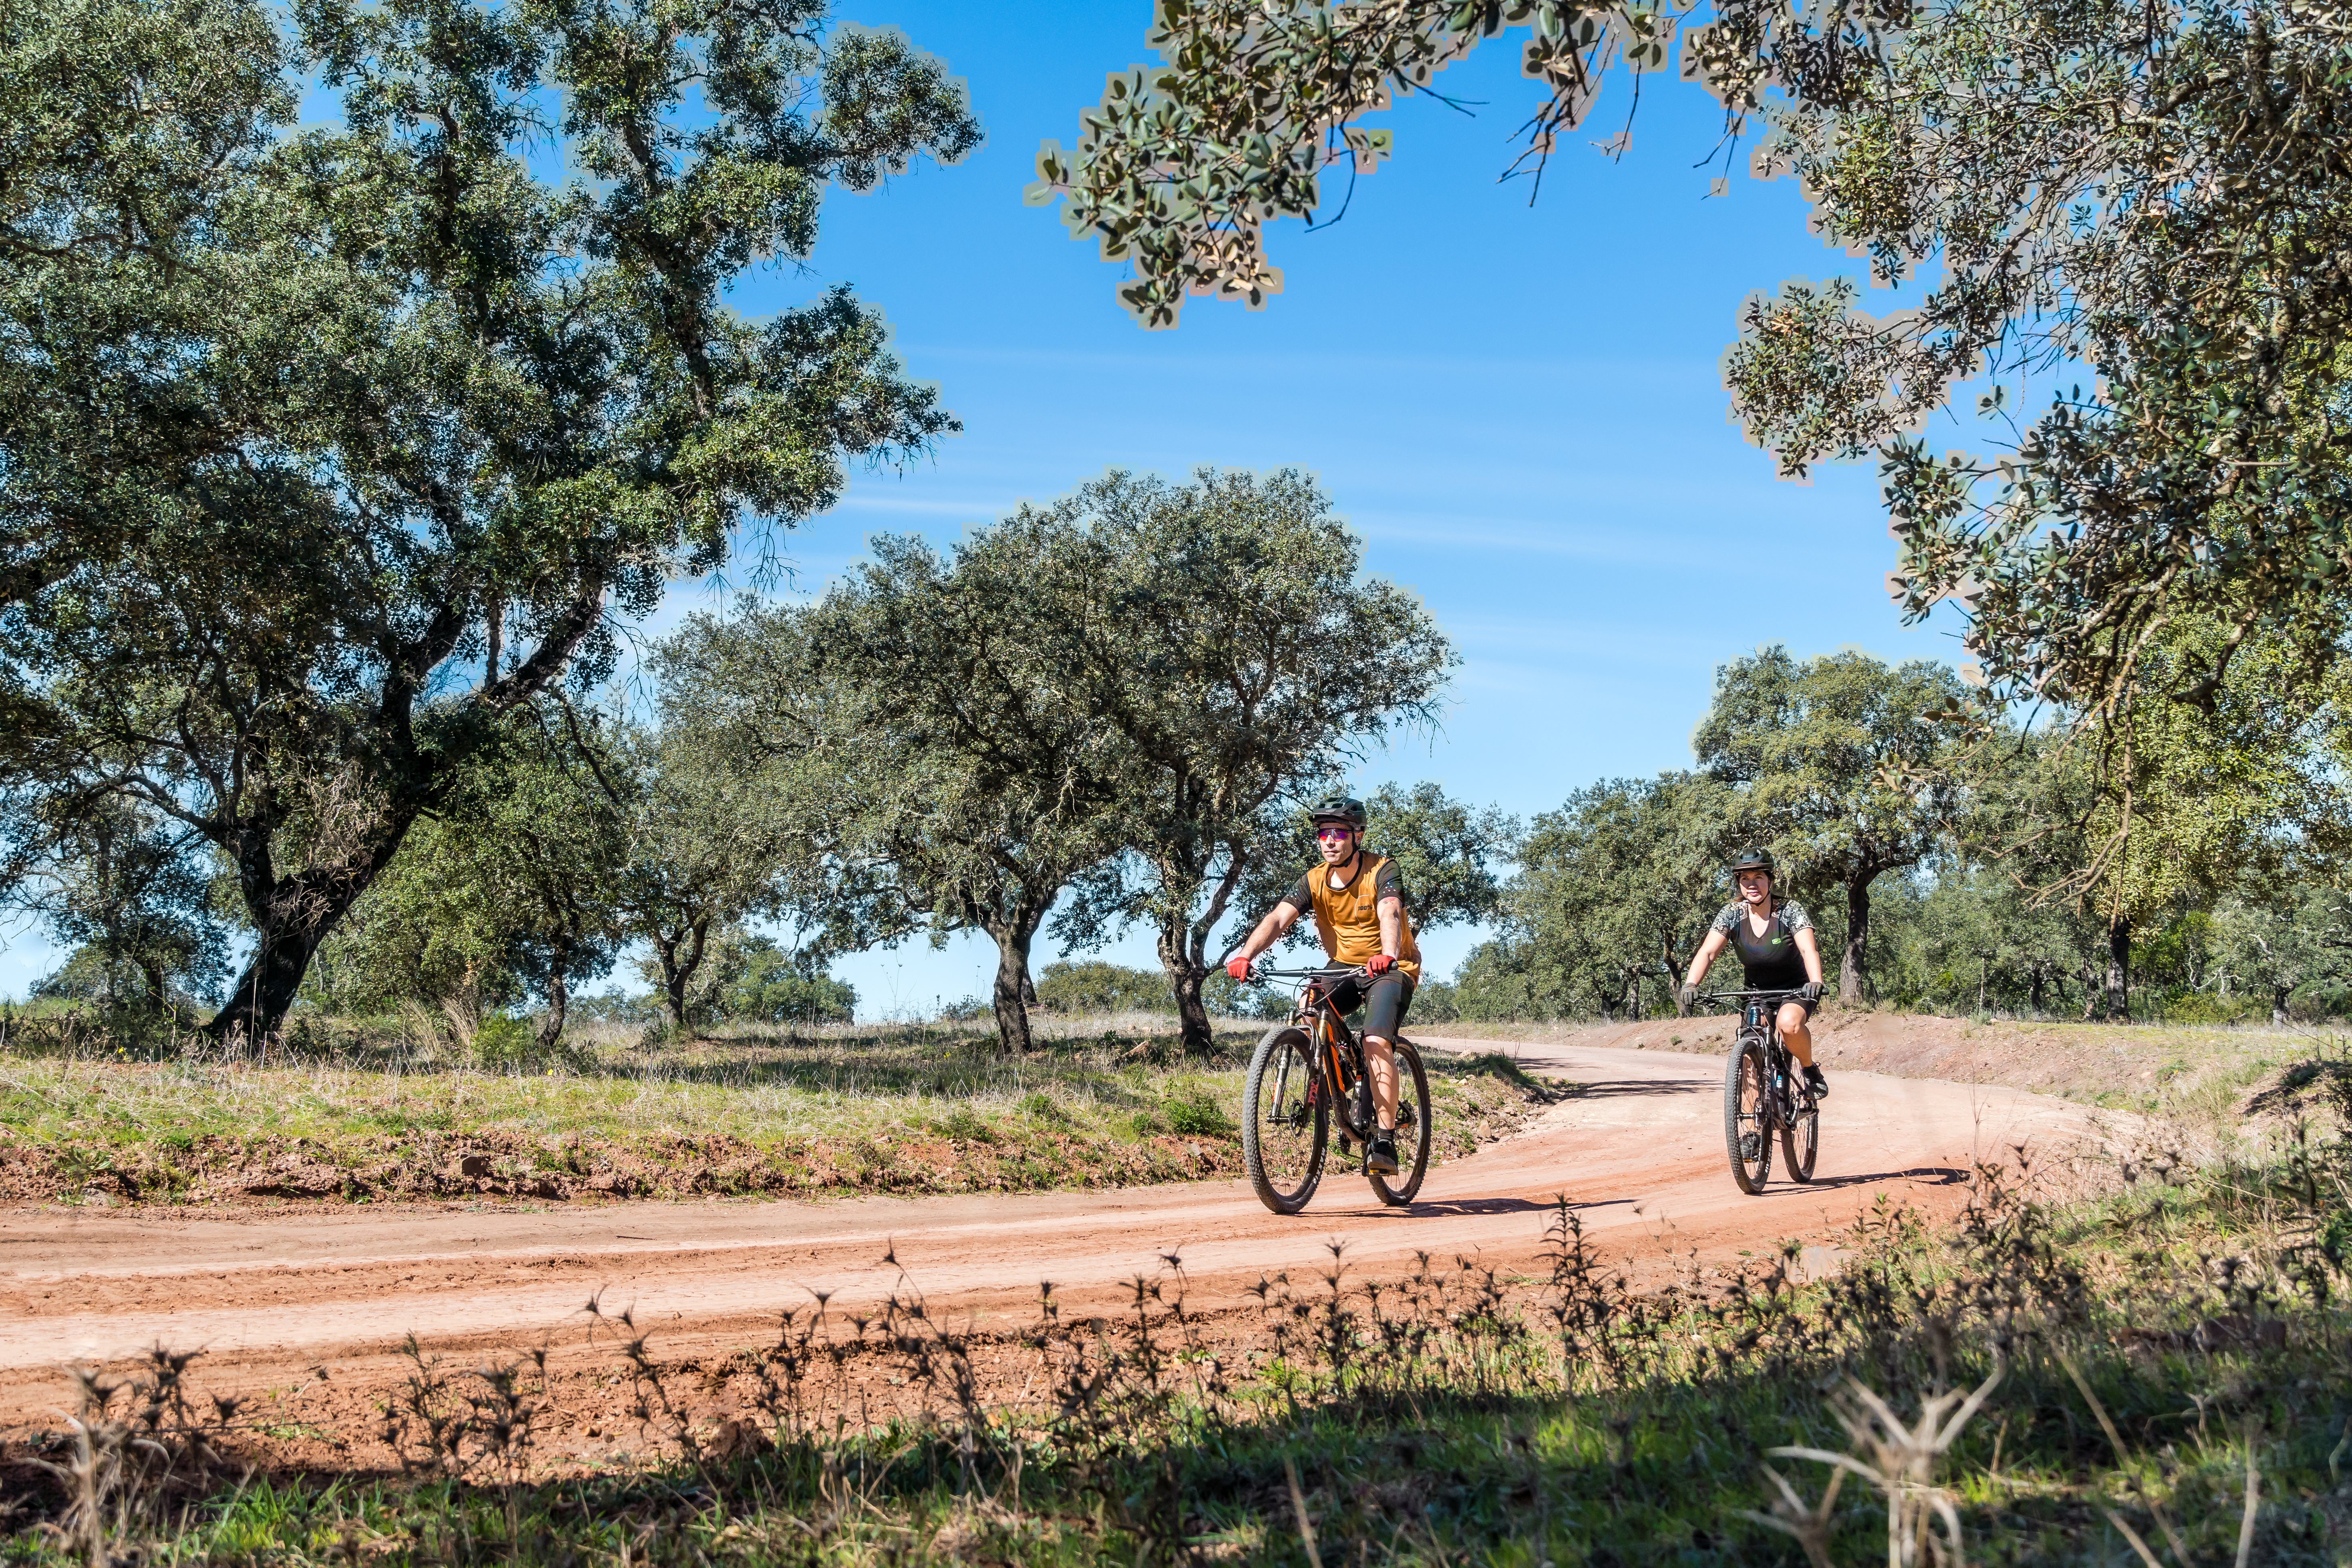 Whether you’re looking for a gentle journey or a challenging route, Algarve is made for cycling